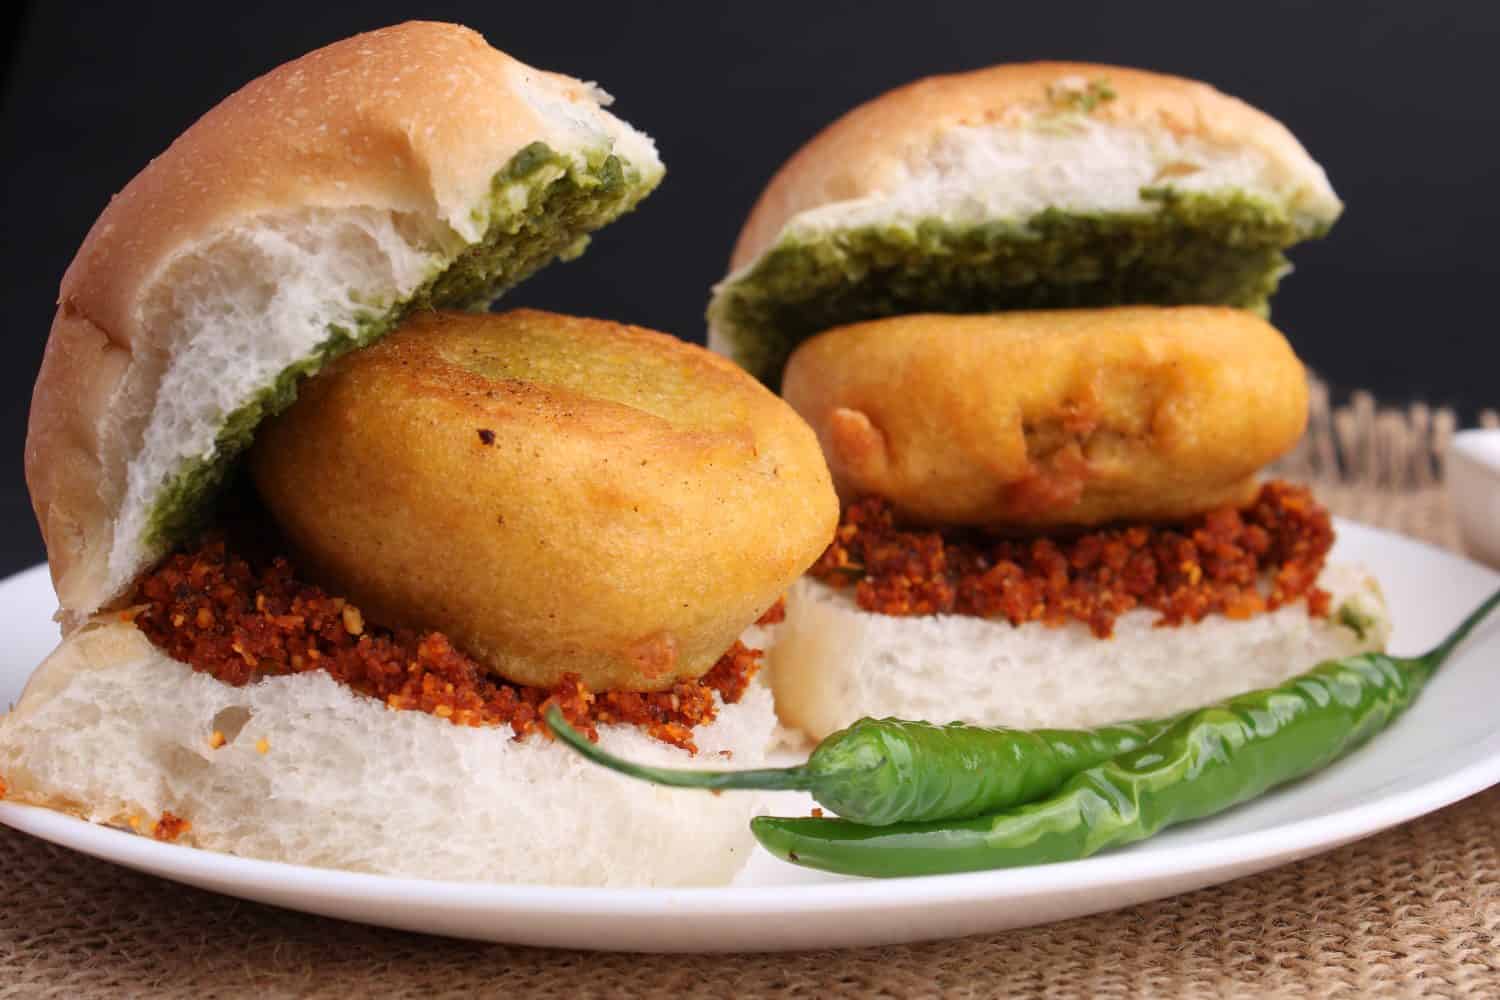 Bombay vada paav is an indian burger. Potato patty is deep fried in gram flour or besan batter and it is served hot with paav or bun like sandwich. Its available and liked all over India